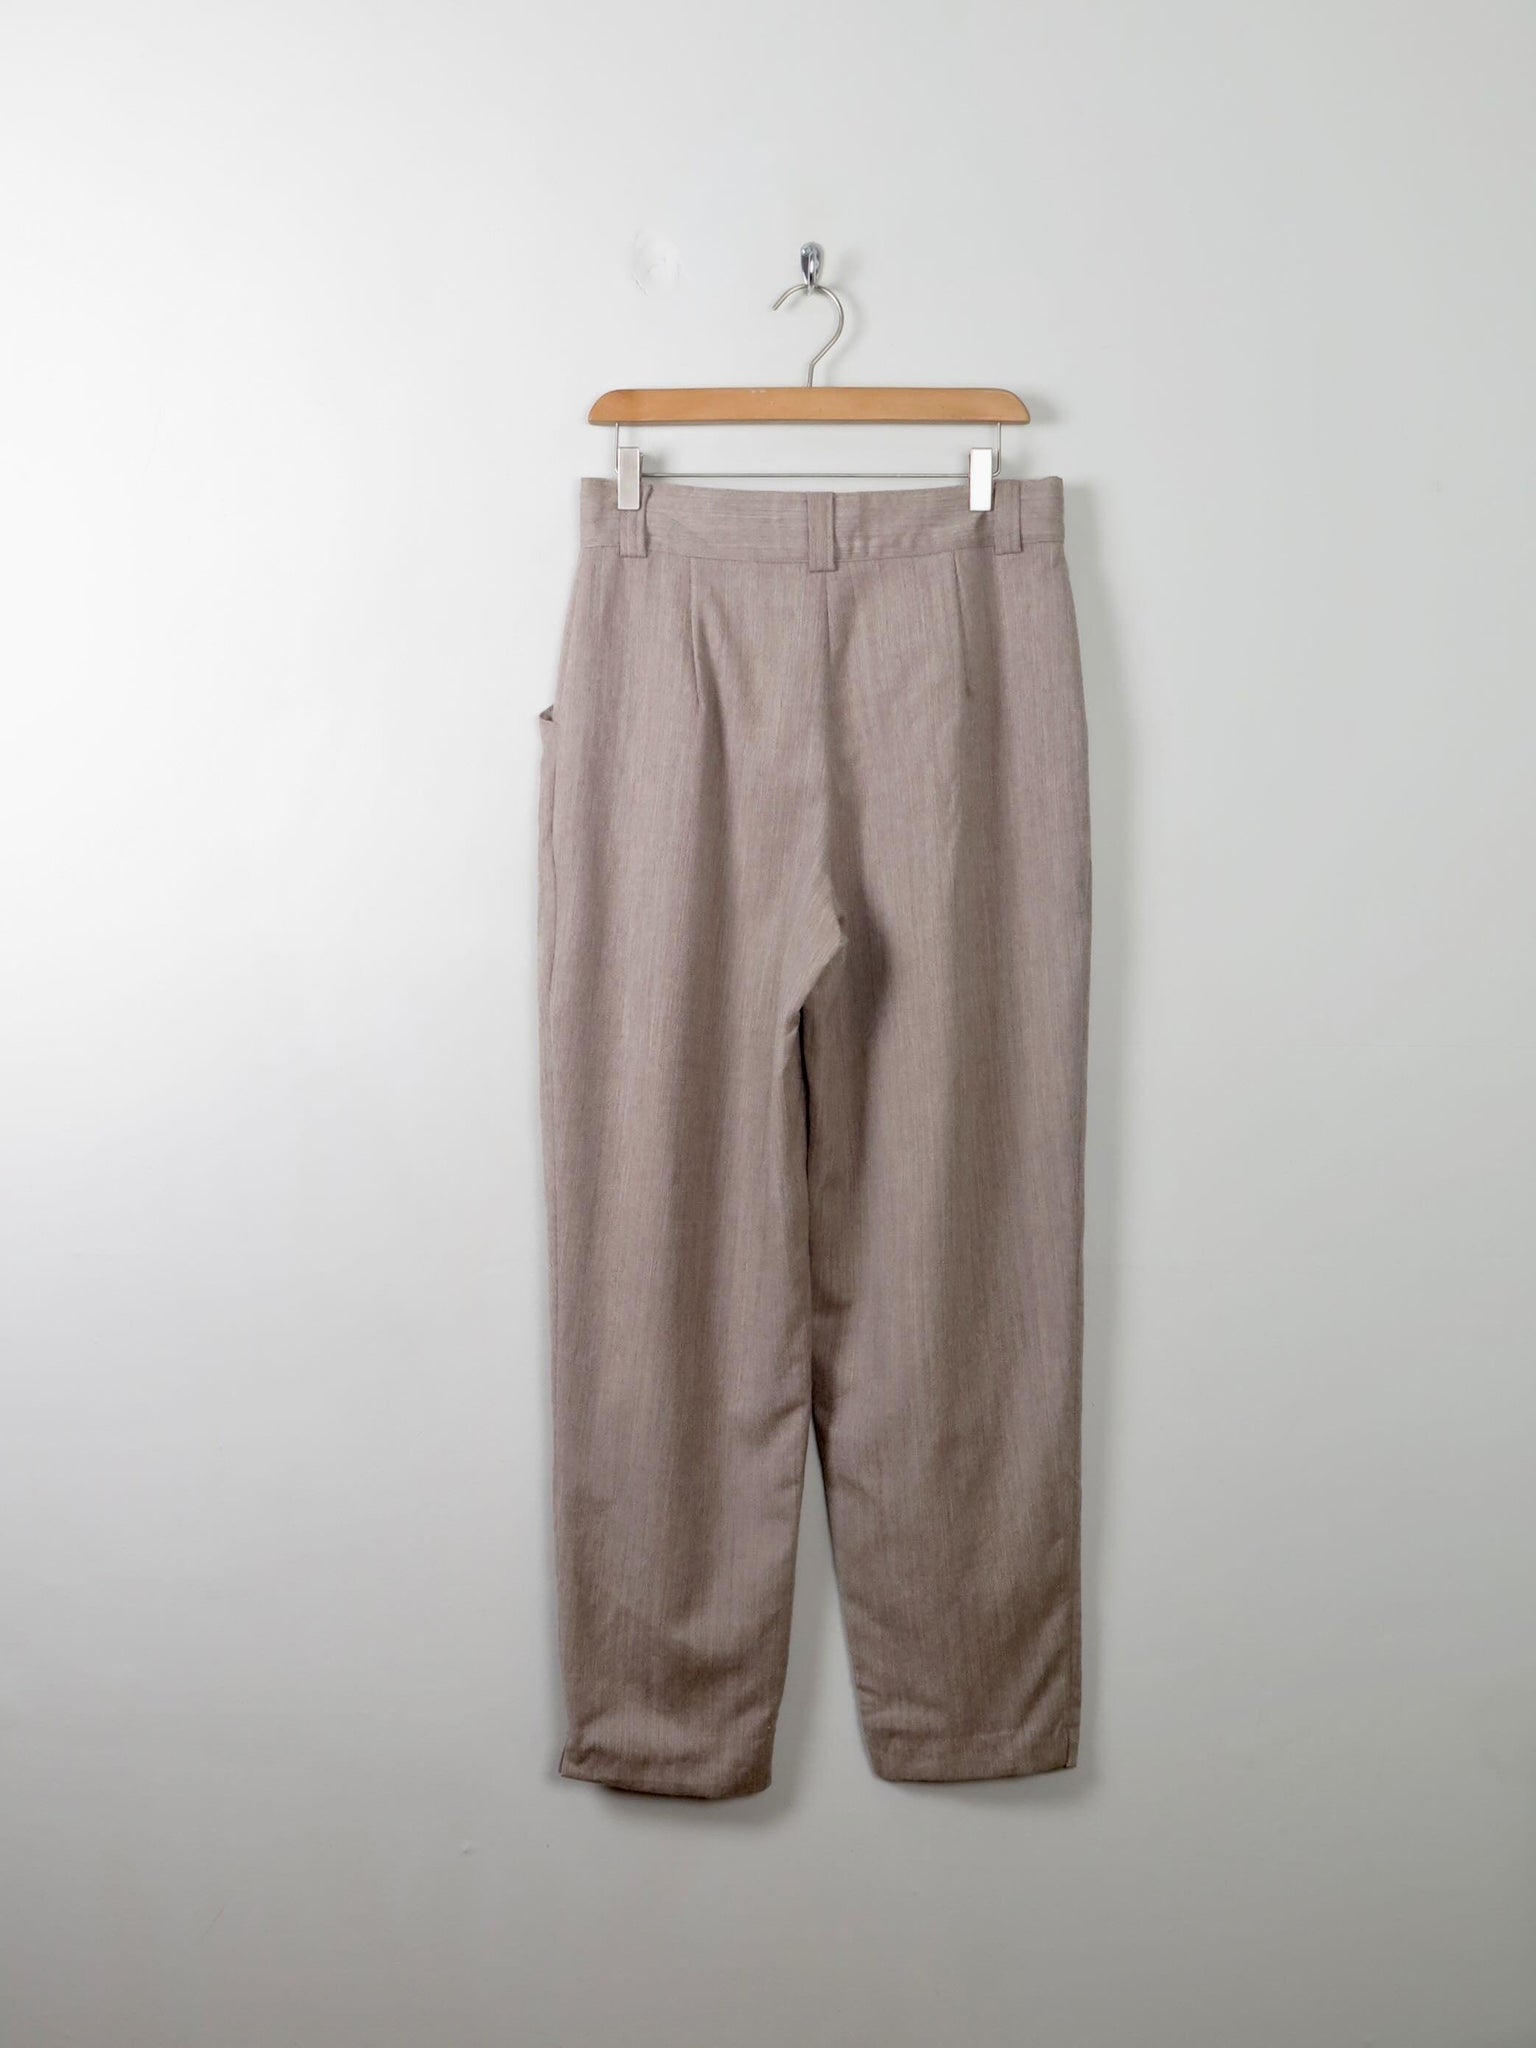 Vintage Women's Beige Taupe Wool Trousers 31" W 28" L - The Harlequin